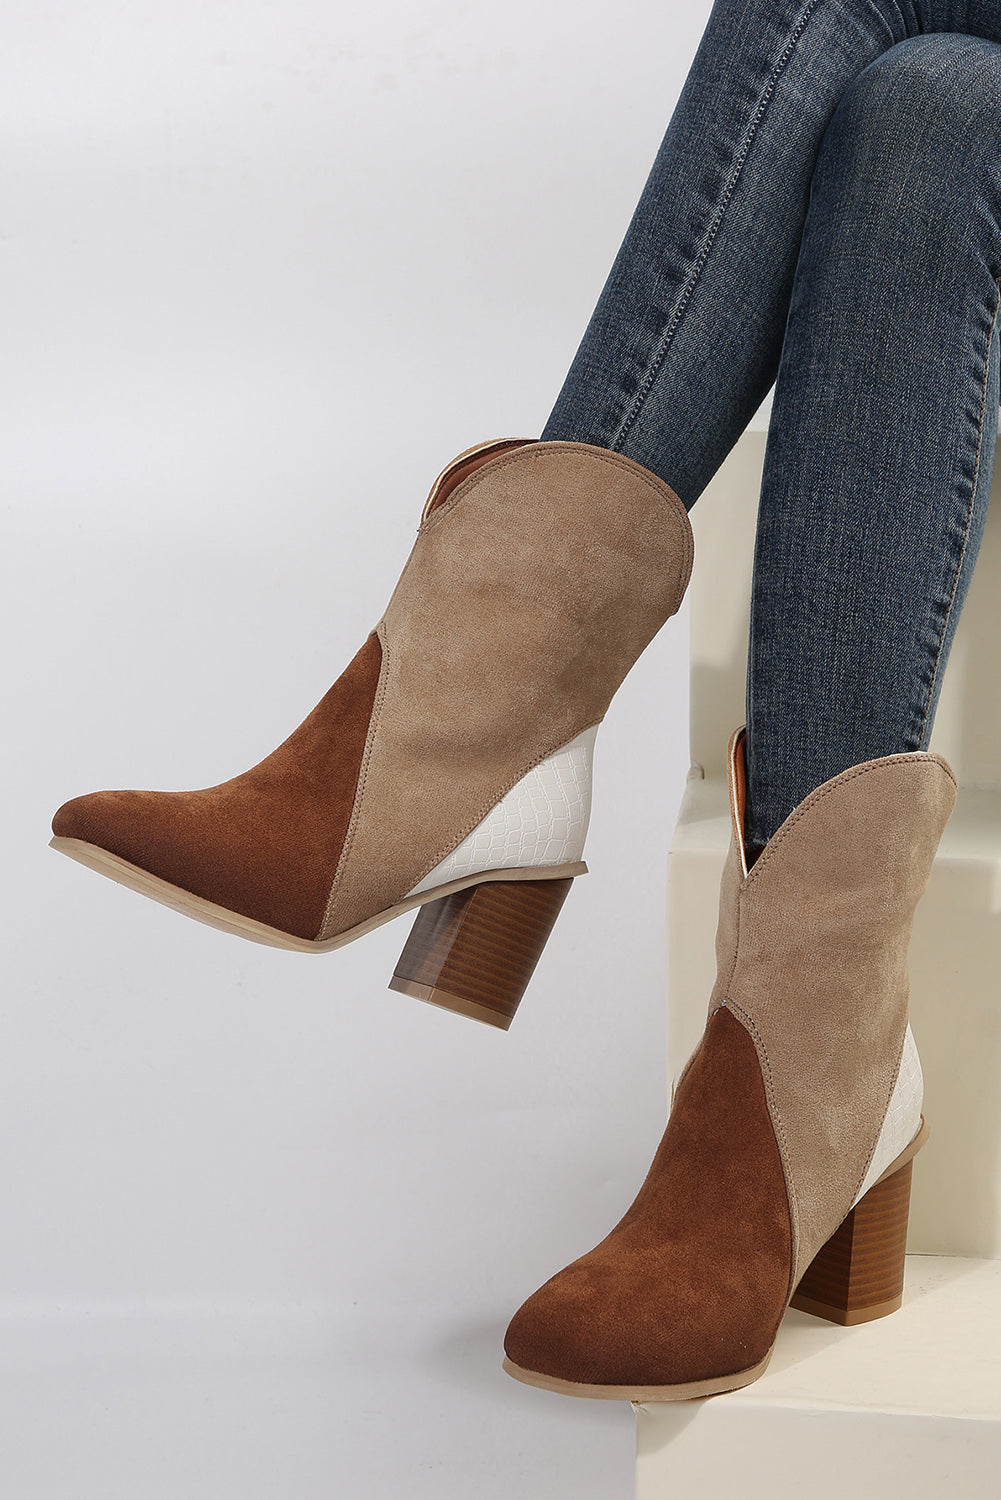 Colorblock Suede Heeled Ankle Booties - women's boots at TFC&H Co.